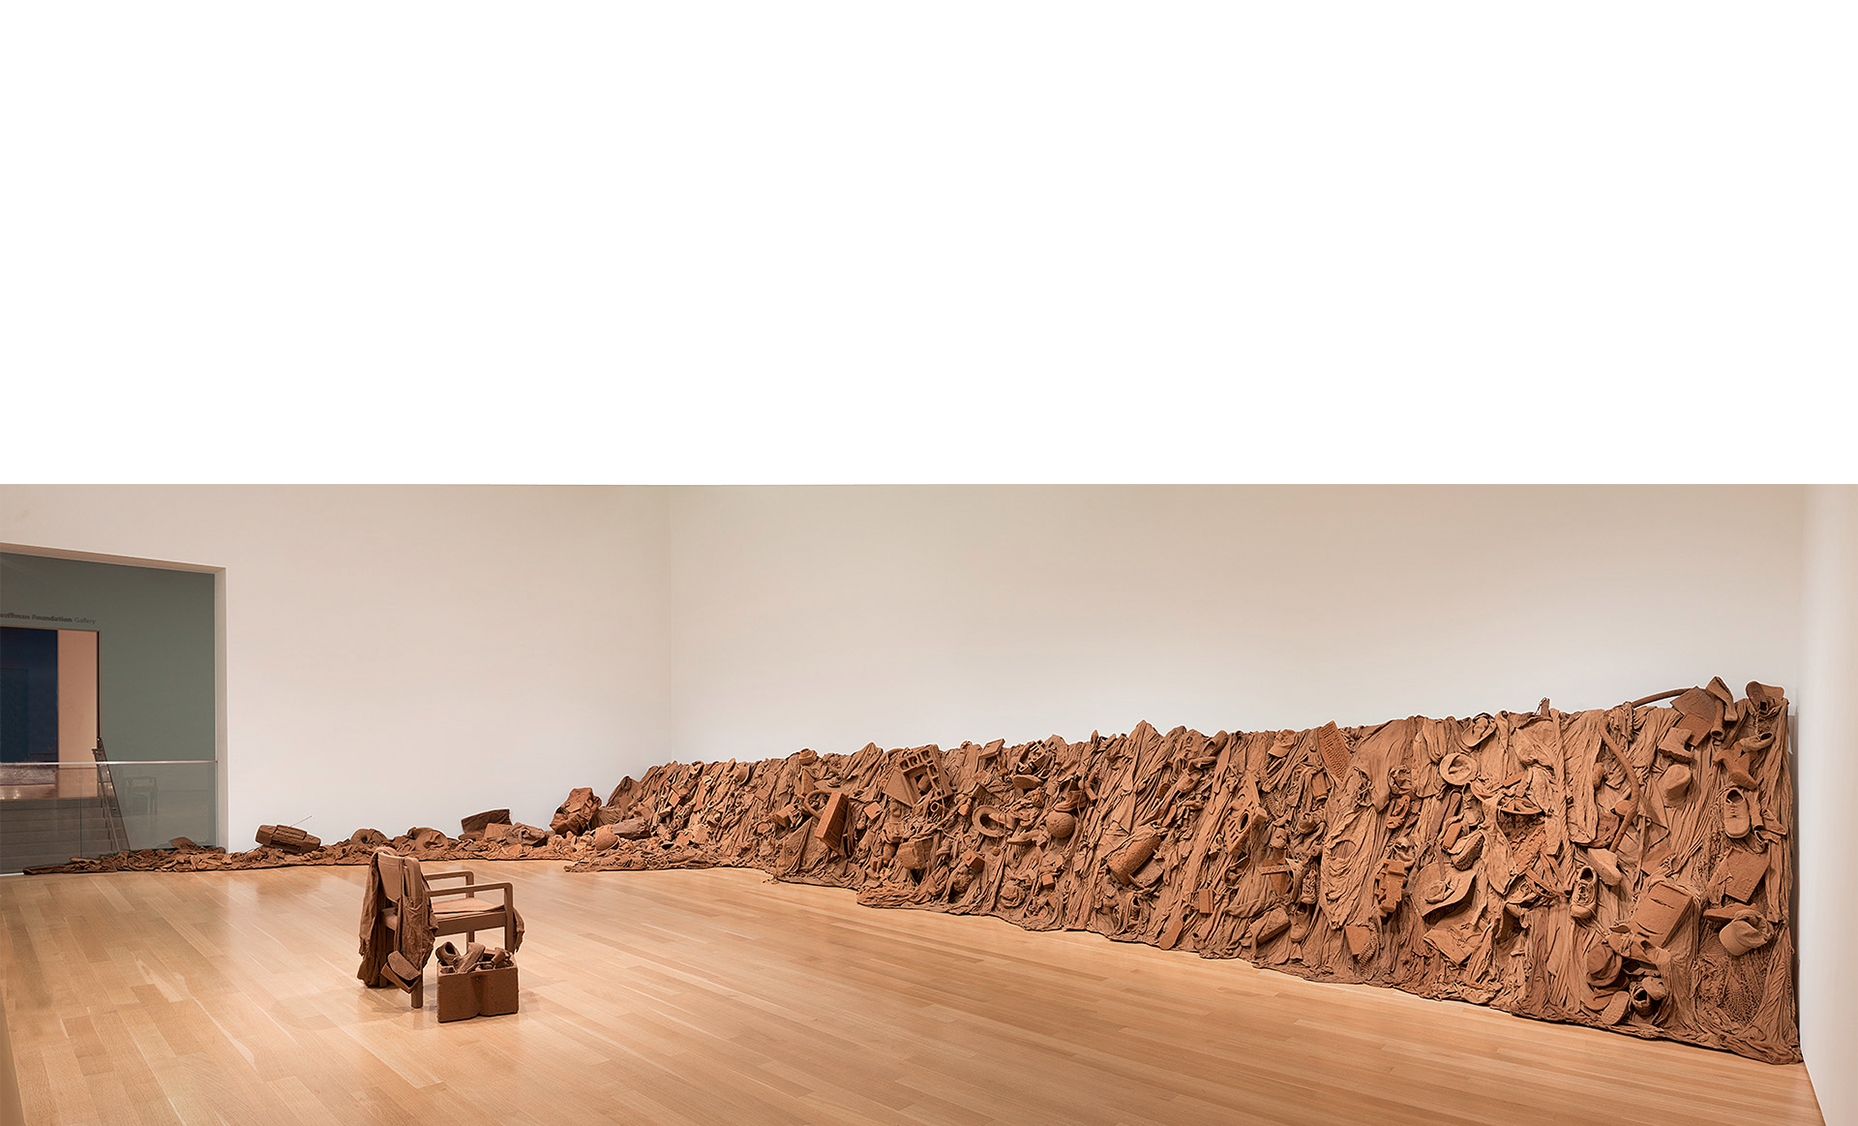  Overview,  Consuming Questions , 2017-18, an avalanche of consumer goods encased in Missouri red subsoil (clay) stabilized with PVA, wooden armature in 6 sections + floor sections. 